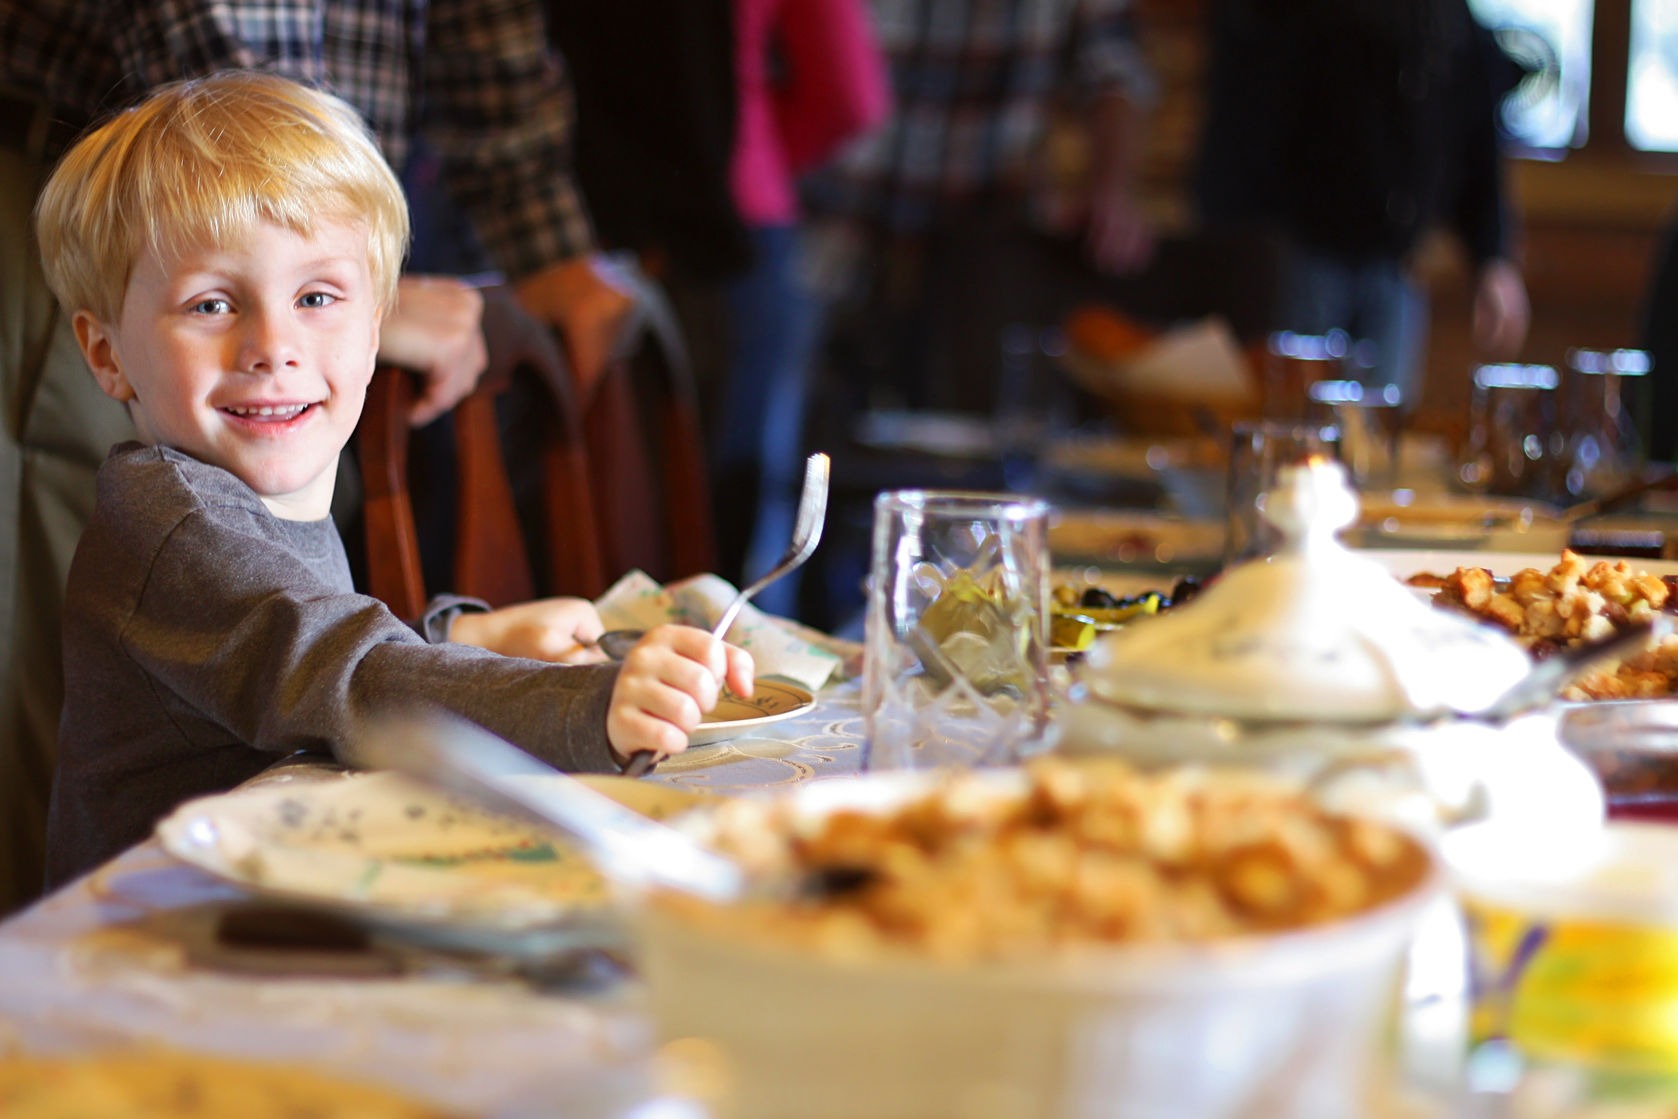 How Do I Reduce My Child with Autism's Anxiety During the Holidays?